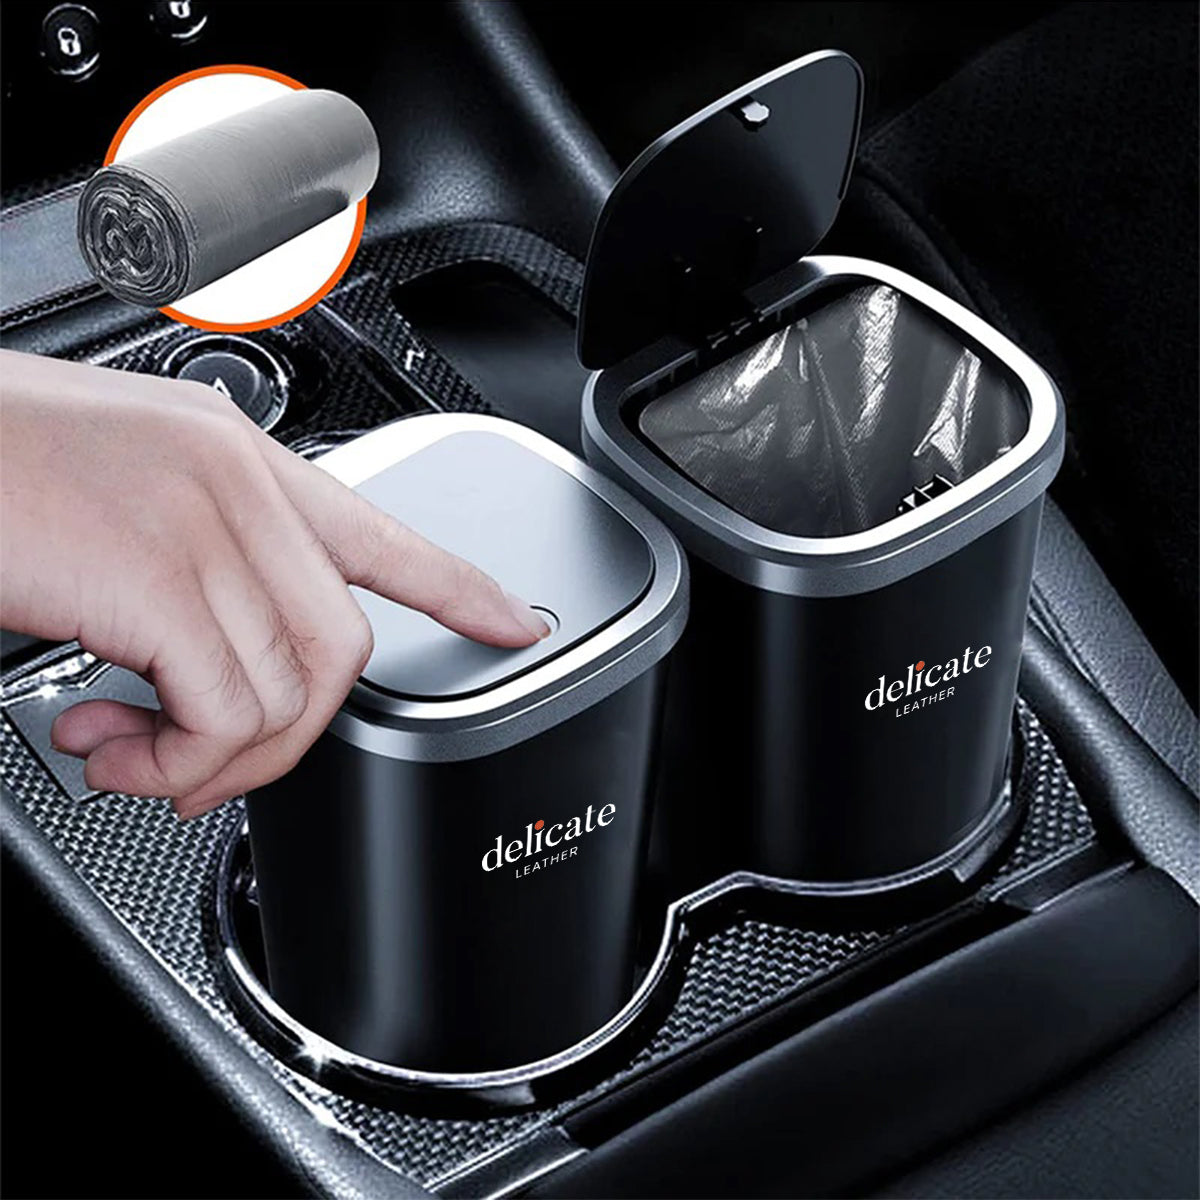 Car Trash Cans, Custom For Your Cars, Compact & Durable Car Accessories for Interior Use 2 Pack, Practical Car Organizers and Storage Cups with Pop-Up Open, Car Accessories NS11993 - Delicate Leather